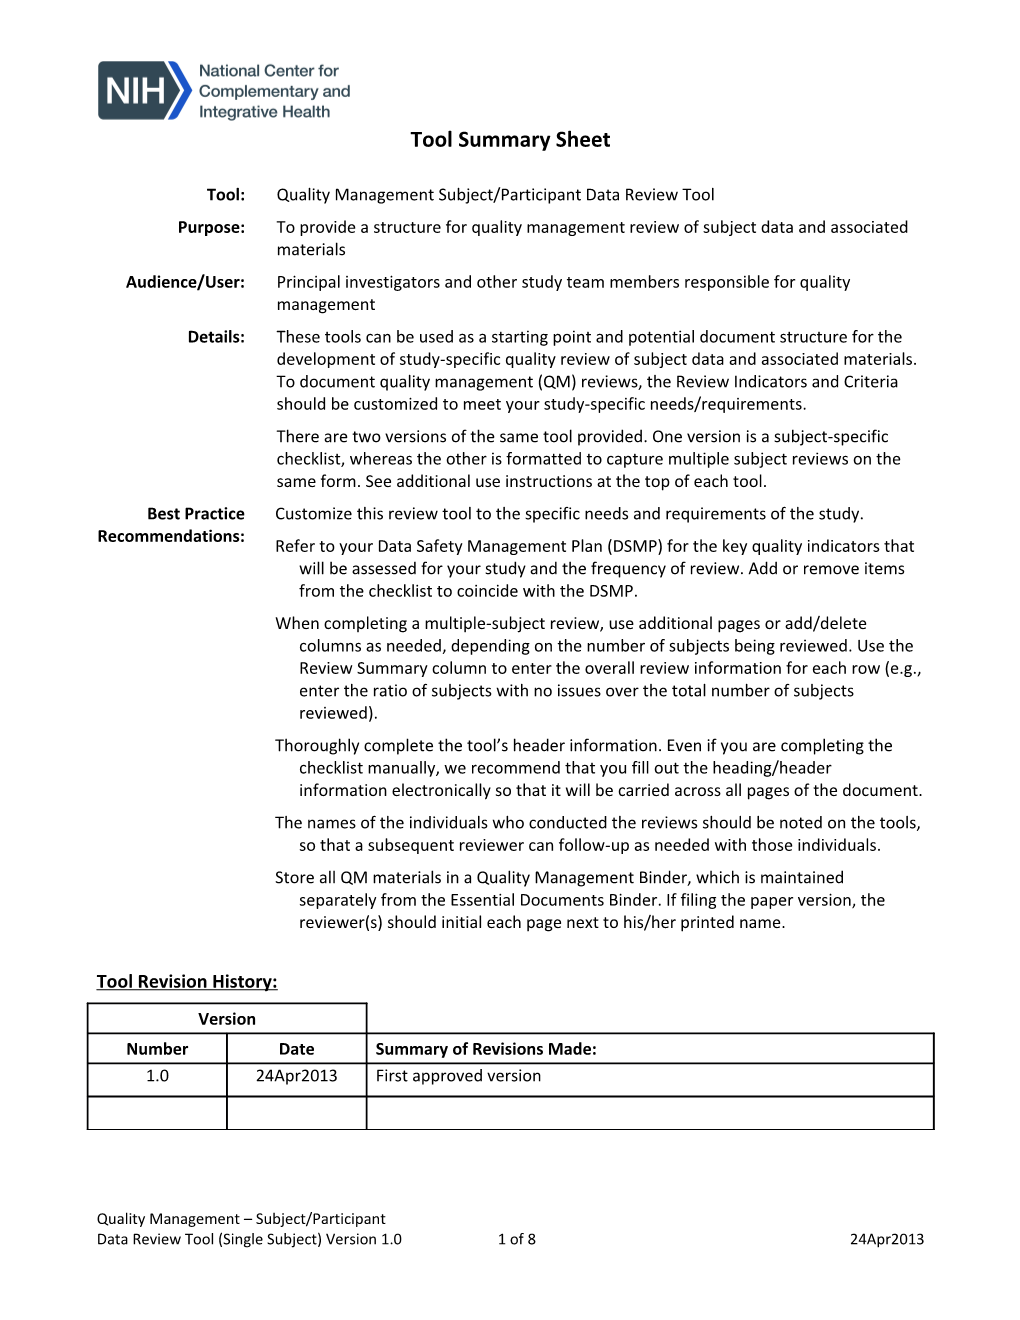 Quality Management Subject/Participant Data Review Tool